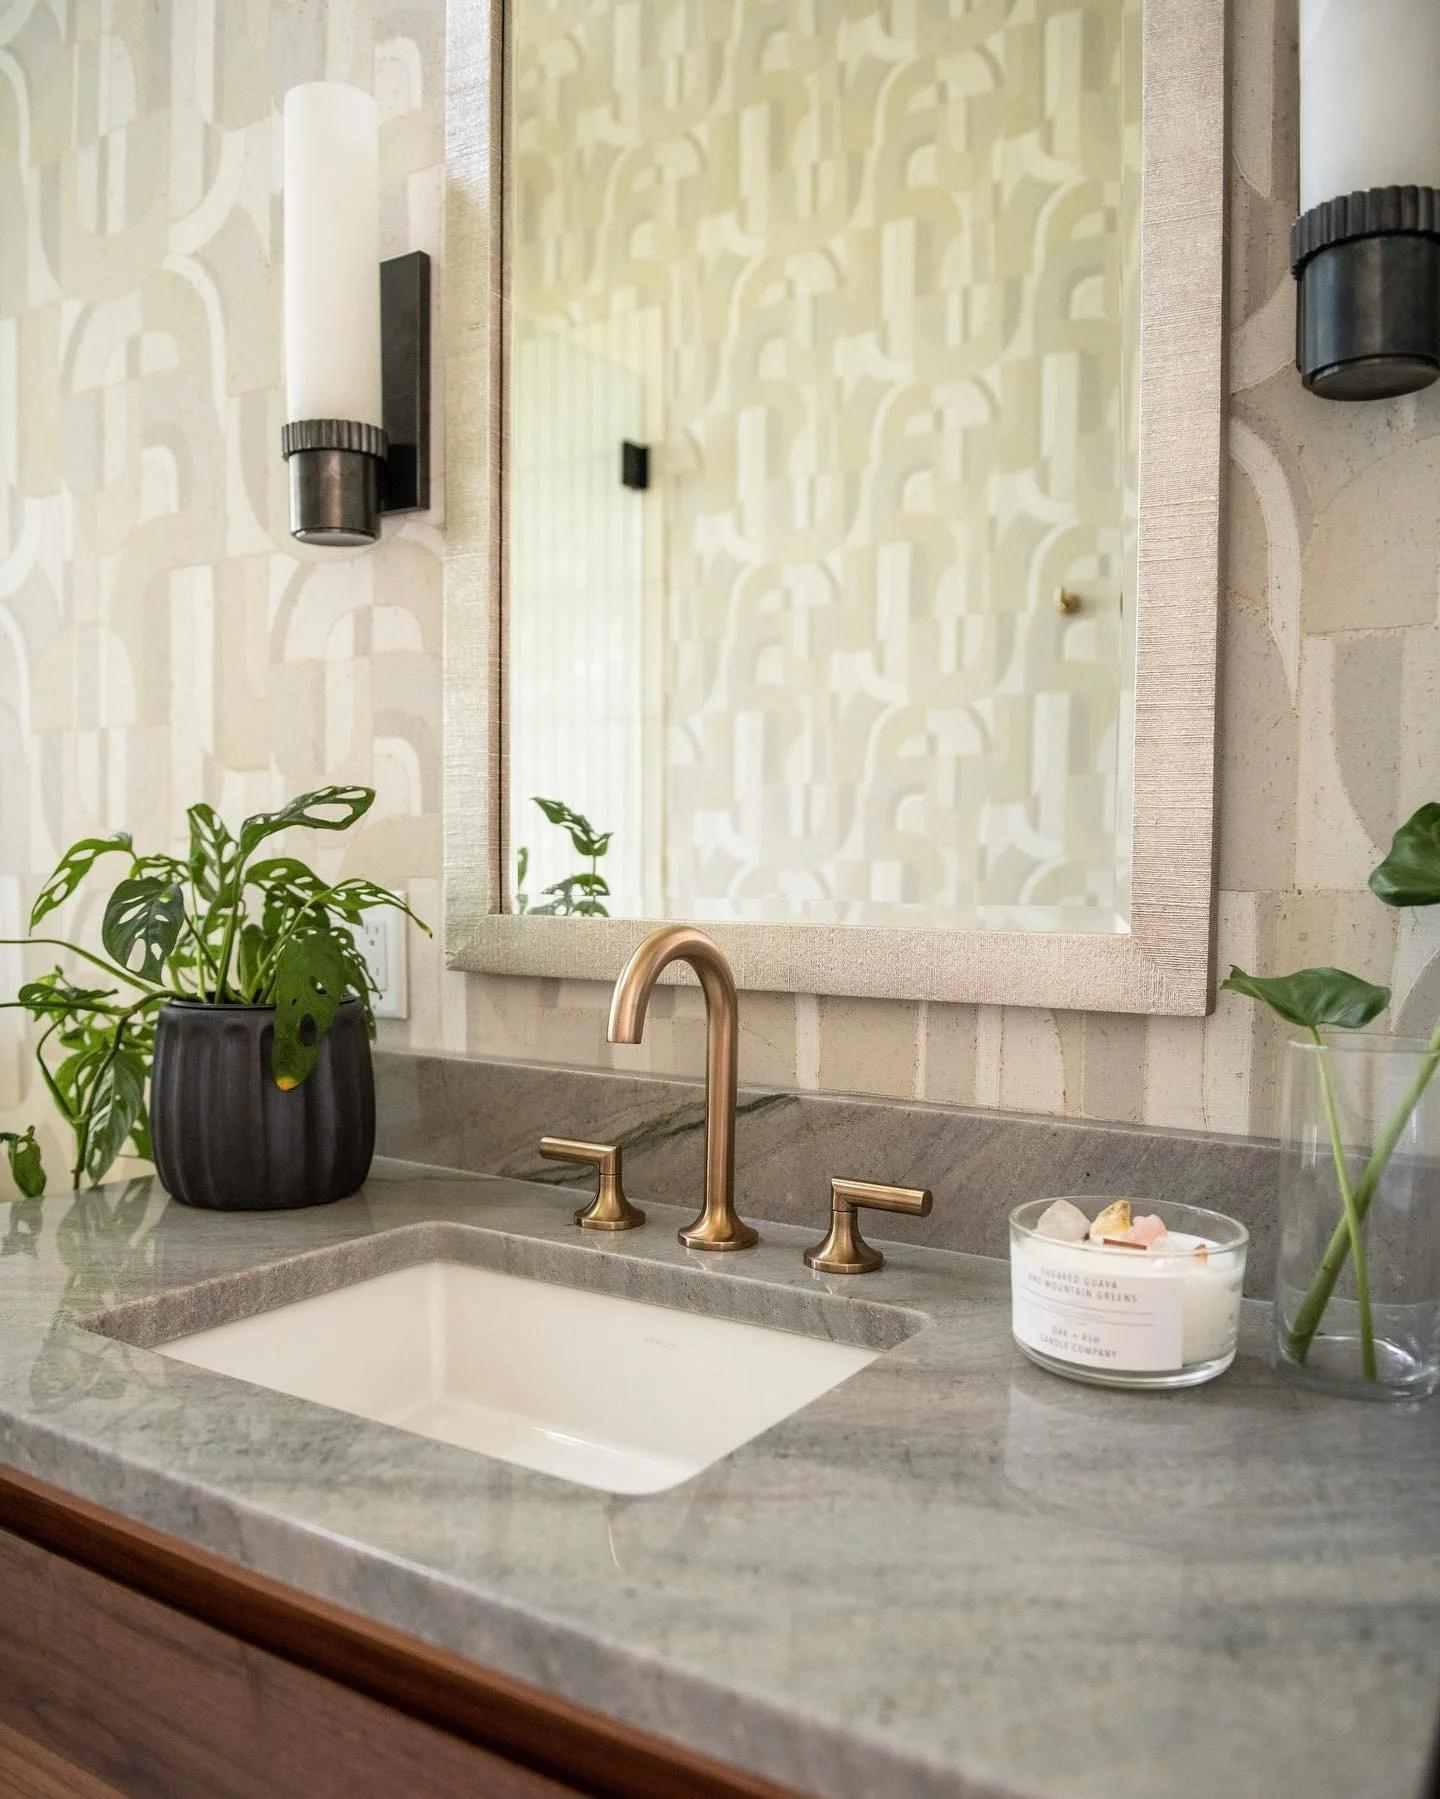 Bath - grey marble counter tops with gold faucet